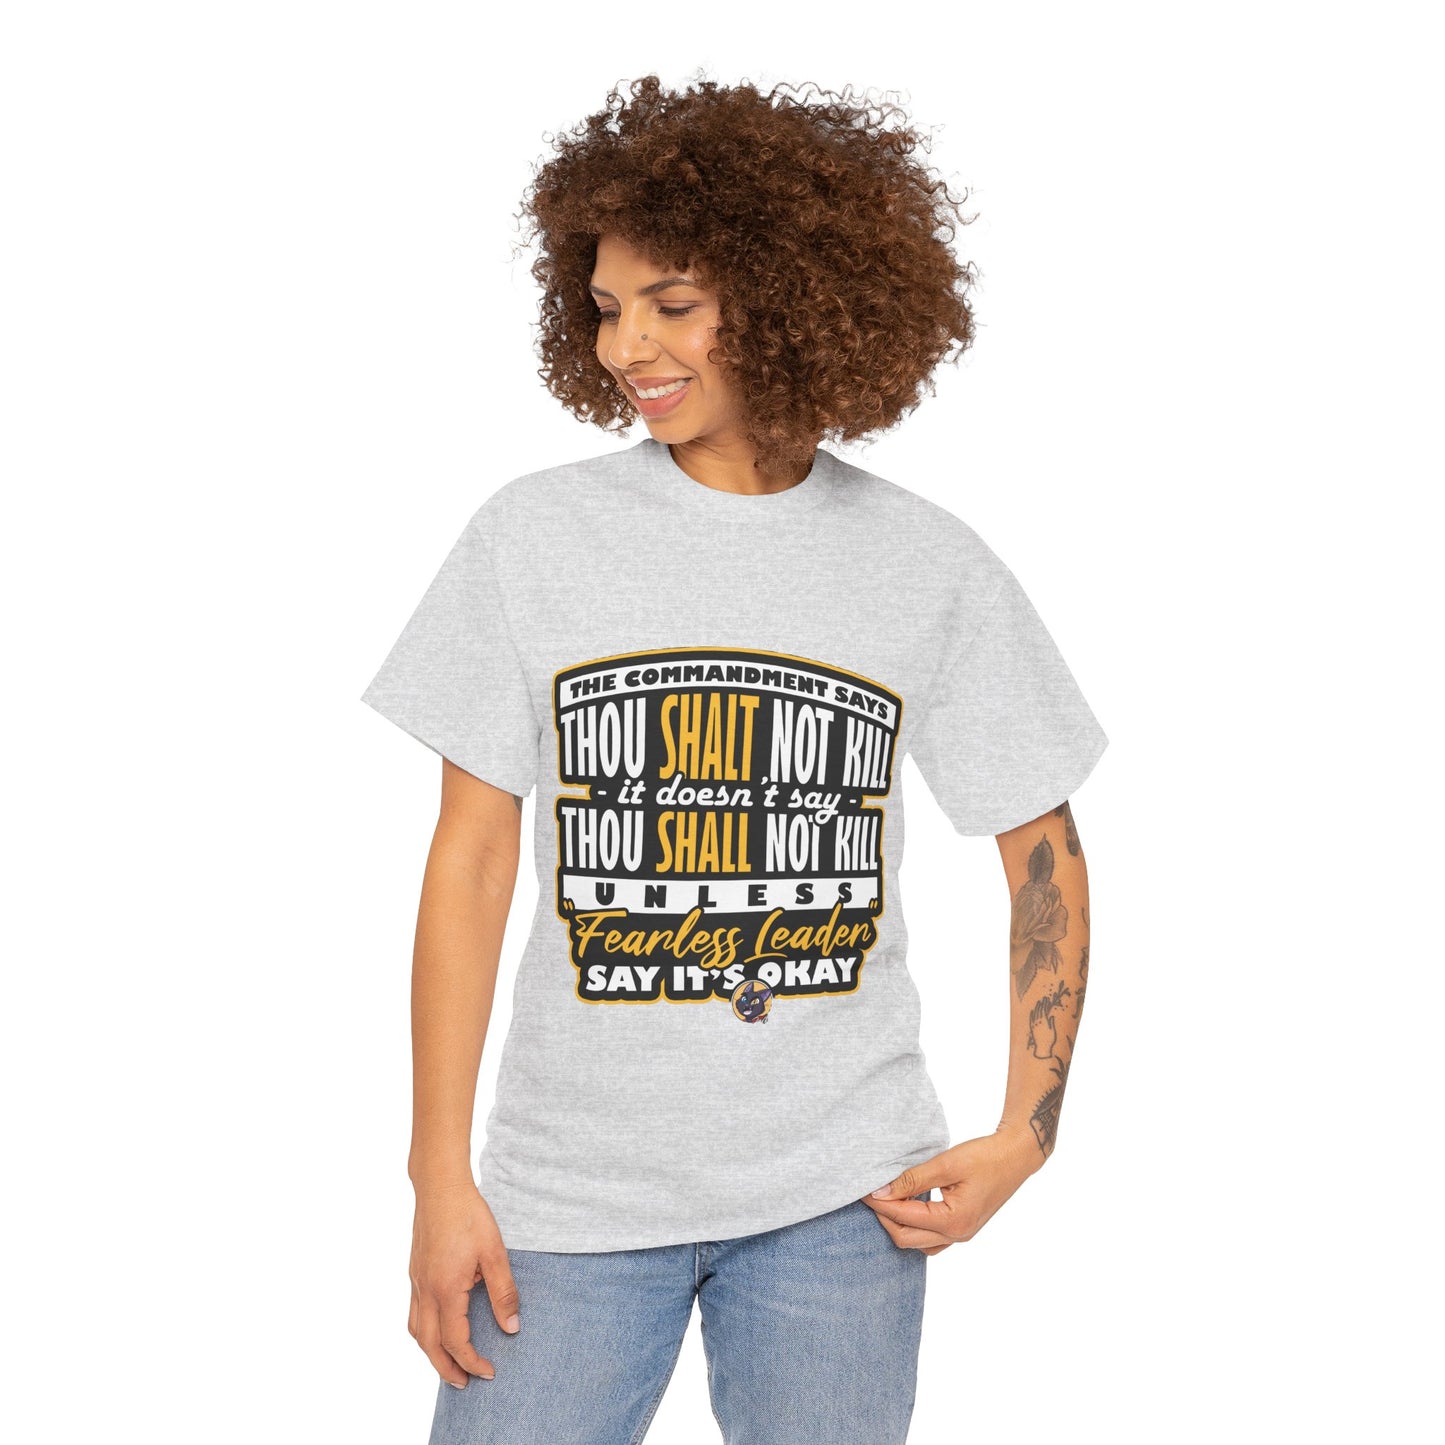 The Stand Out T-Shirt: The commandment says thou shalt not kill Jack